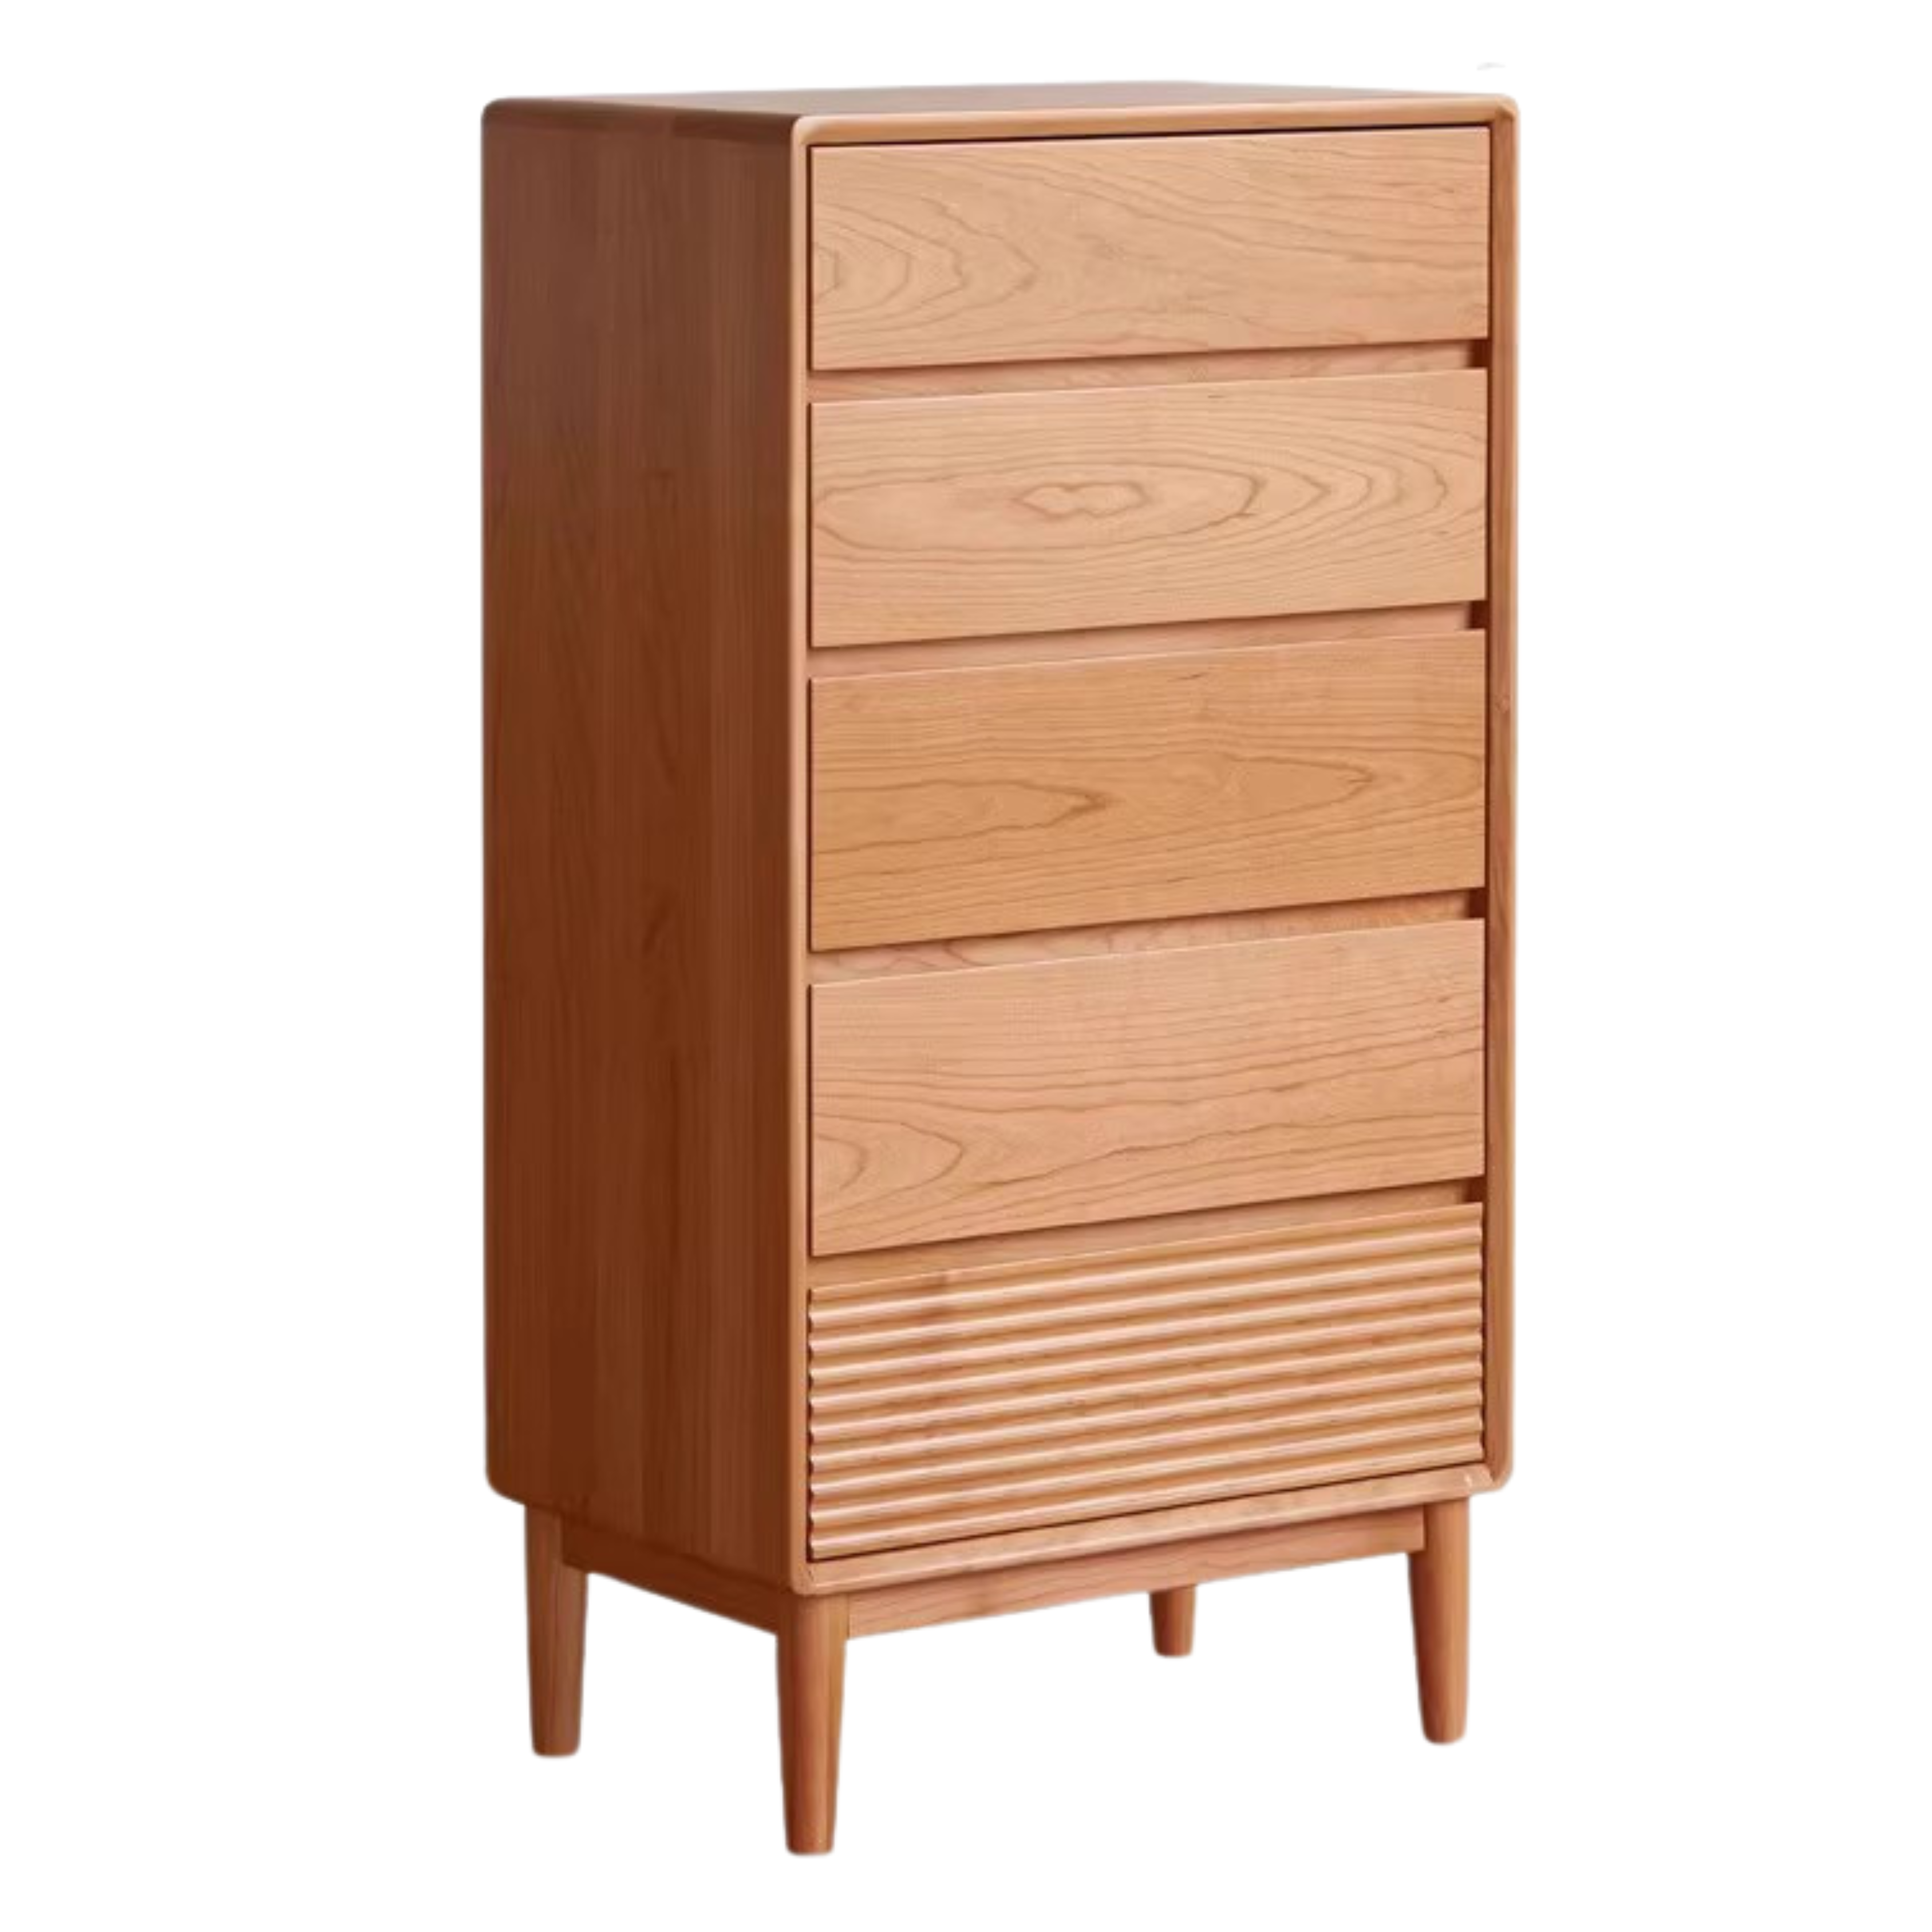 Cherry Wood Chest of Drawers, Nine Drawer Cabinet)